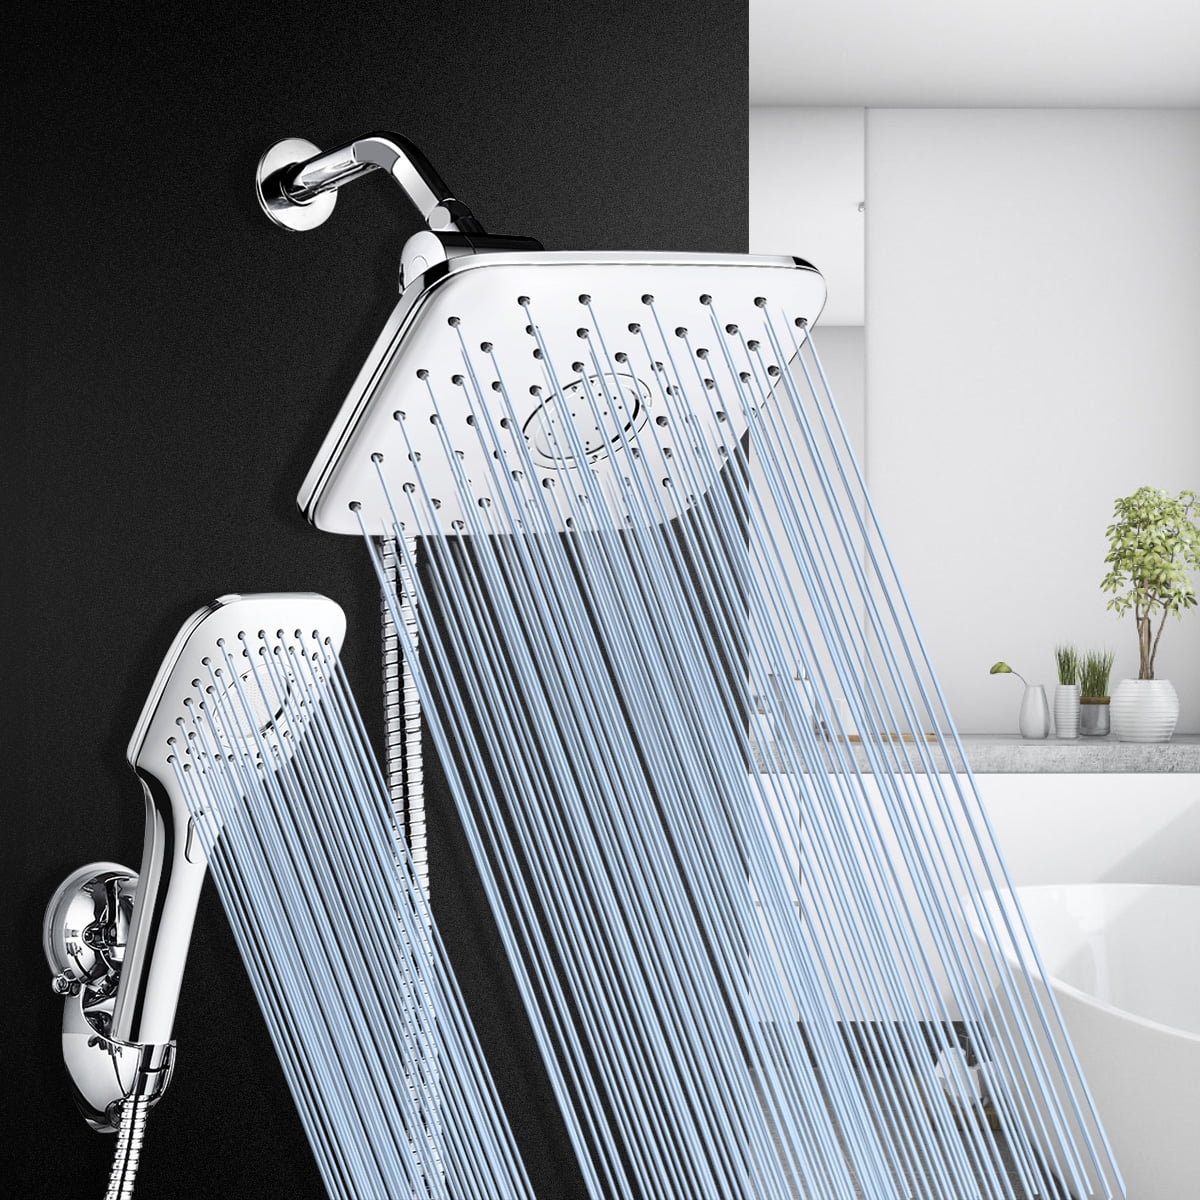 4 Setting Luxury Rainfall Shower Head Combo With Wand Flow Control Button,Chrome 